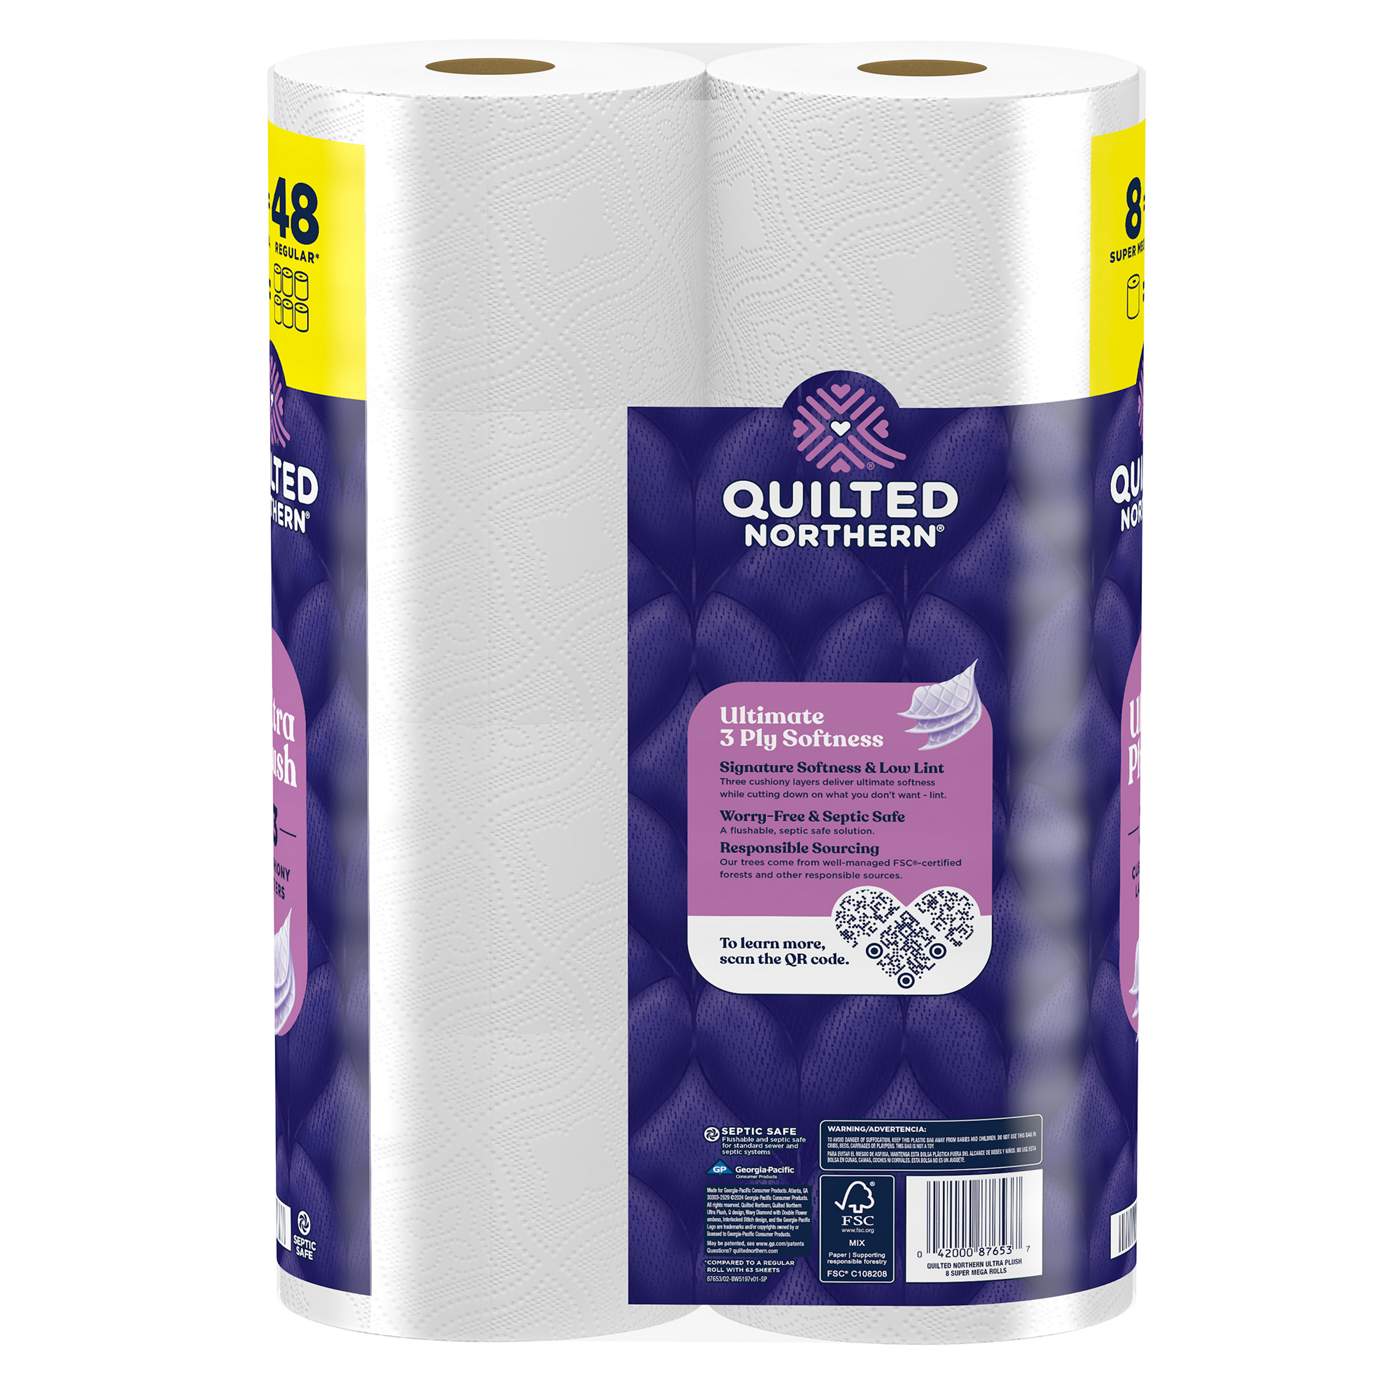 Quilted Northern Ultra Plush Toilet Paper; image 2 of 2